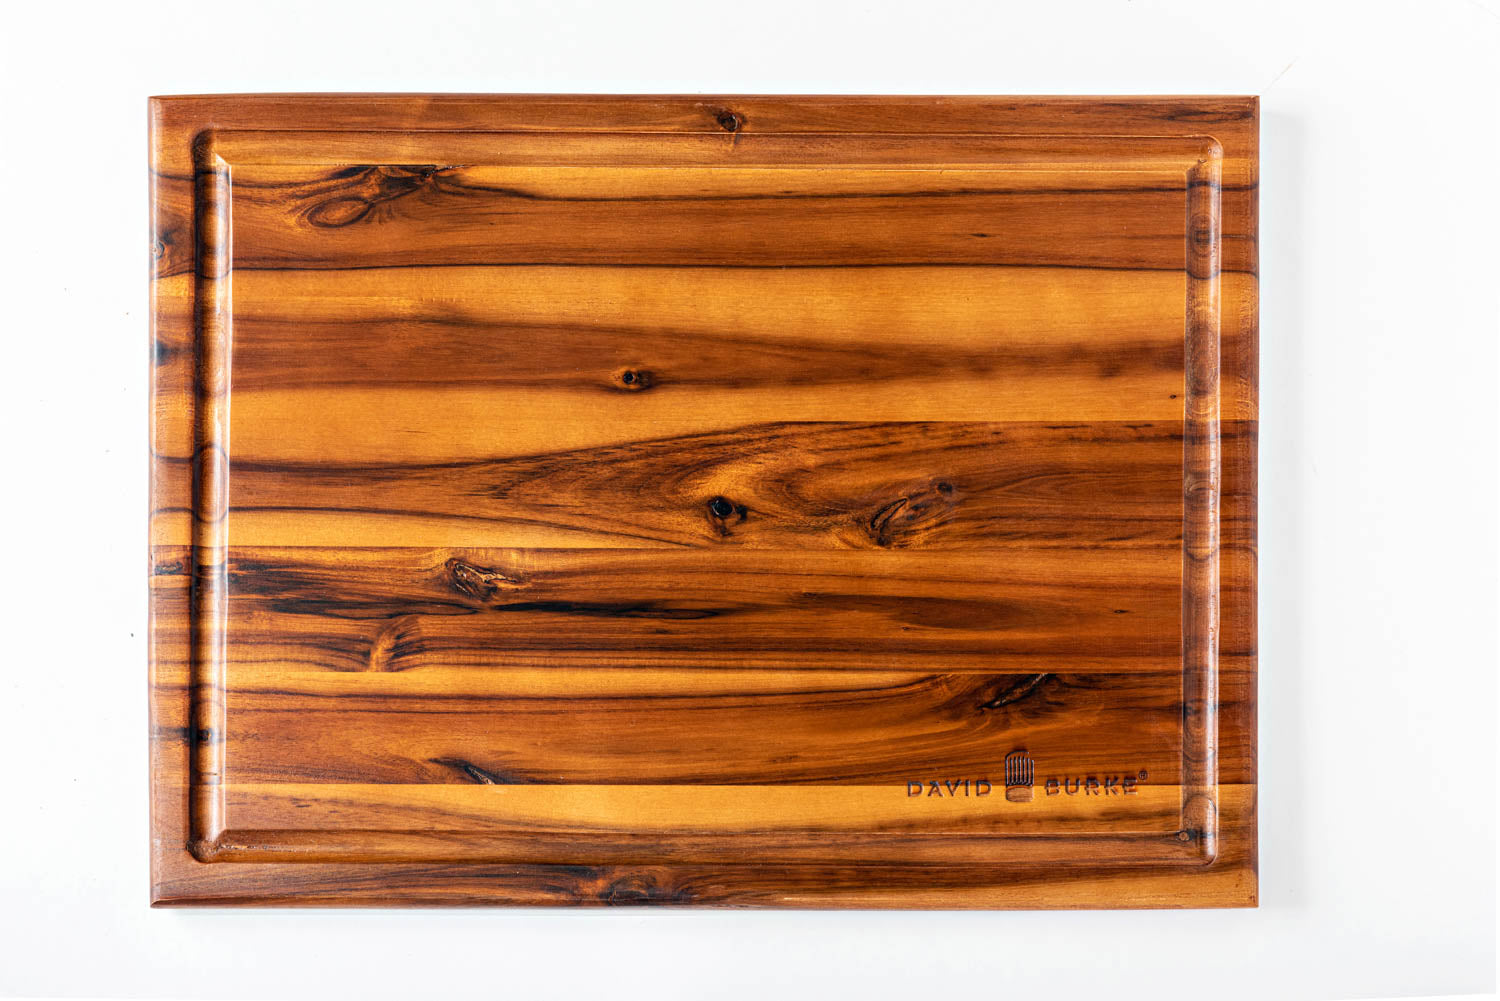  Extra Large Acacia Wood Cutting Board w/Juice Grooves